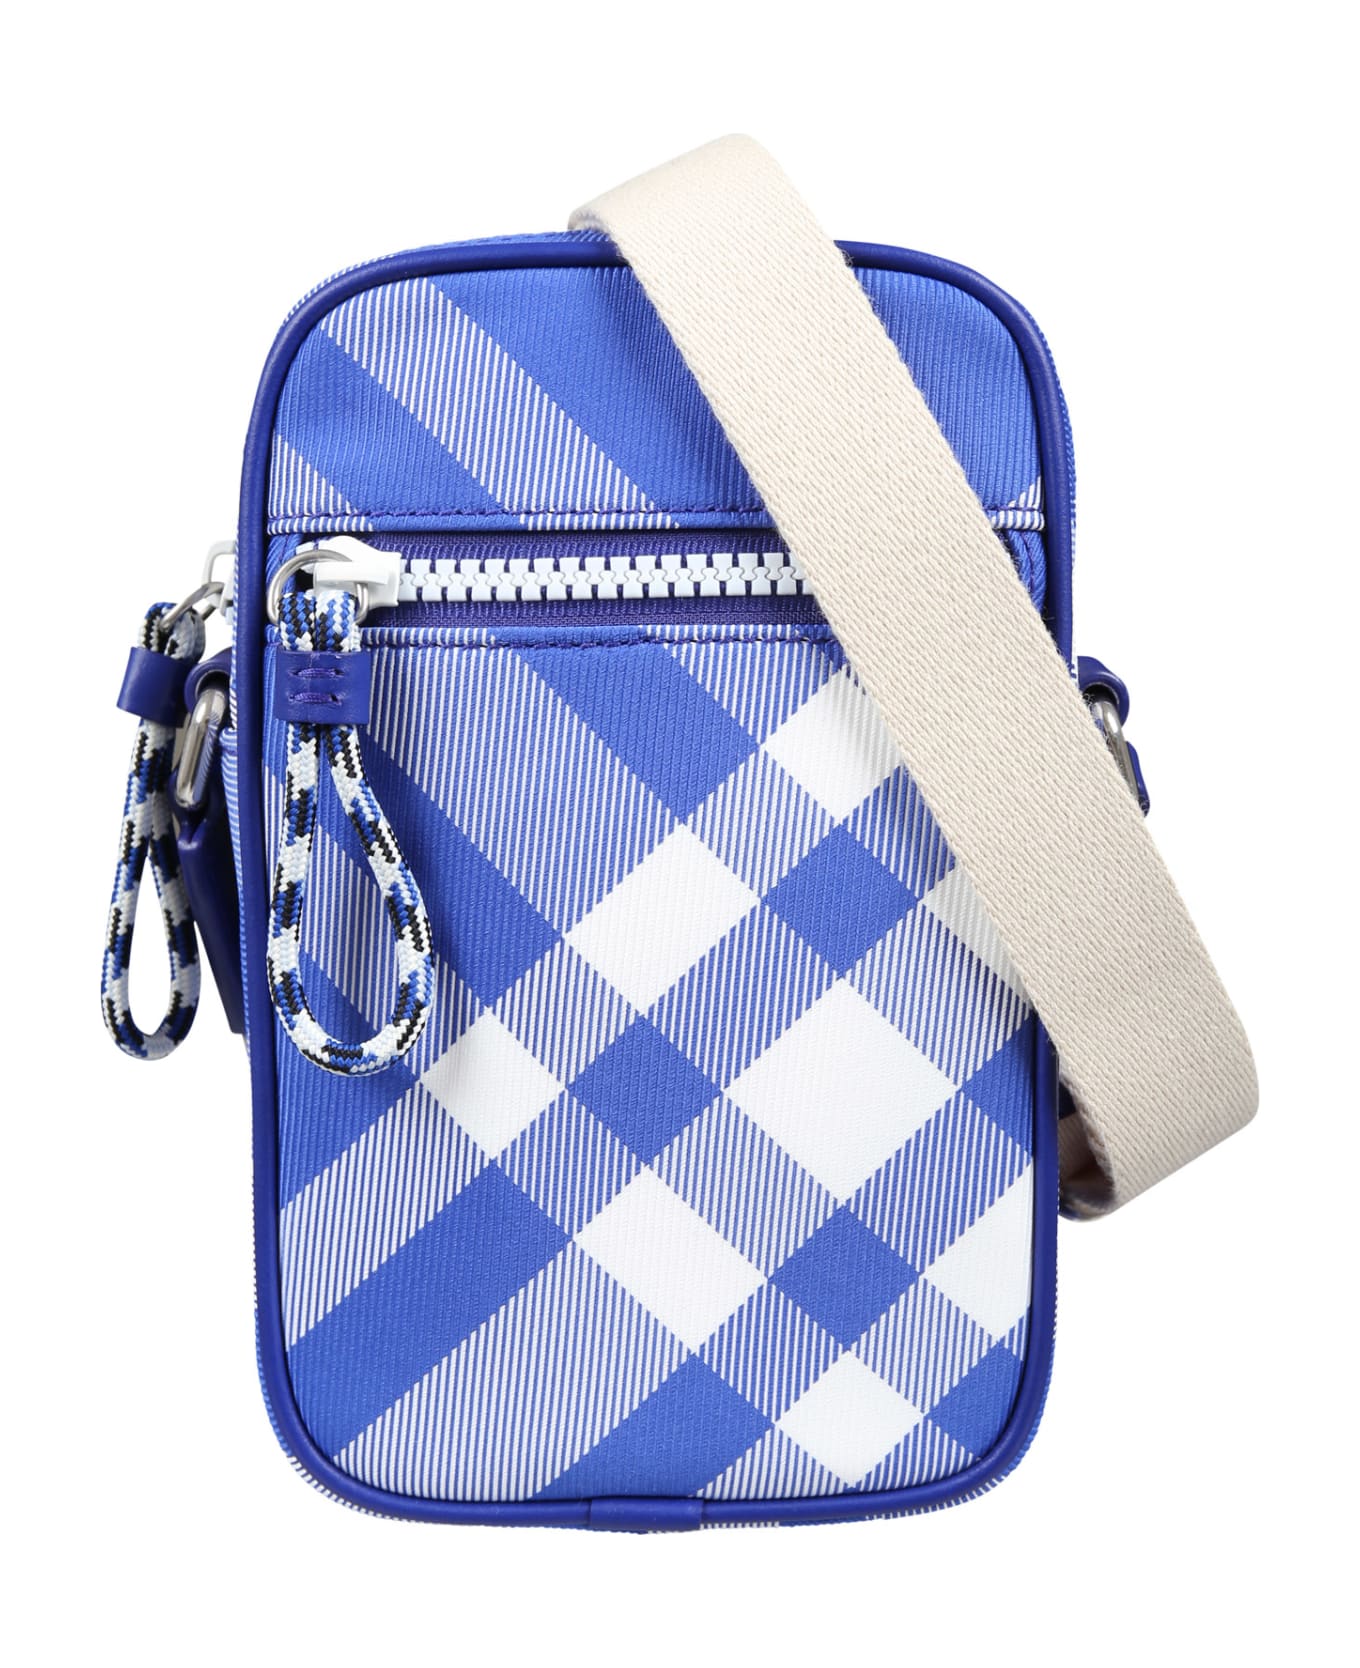 Burberry Blue Bag For Kids With Check - Blue アクセサリー＆ギフト